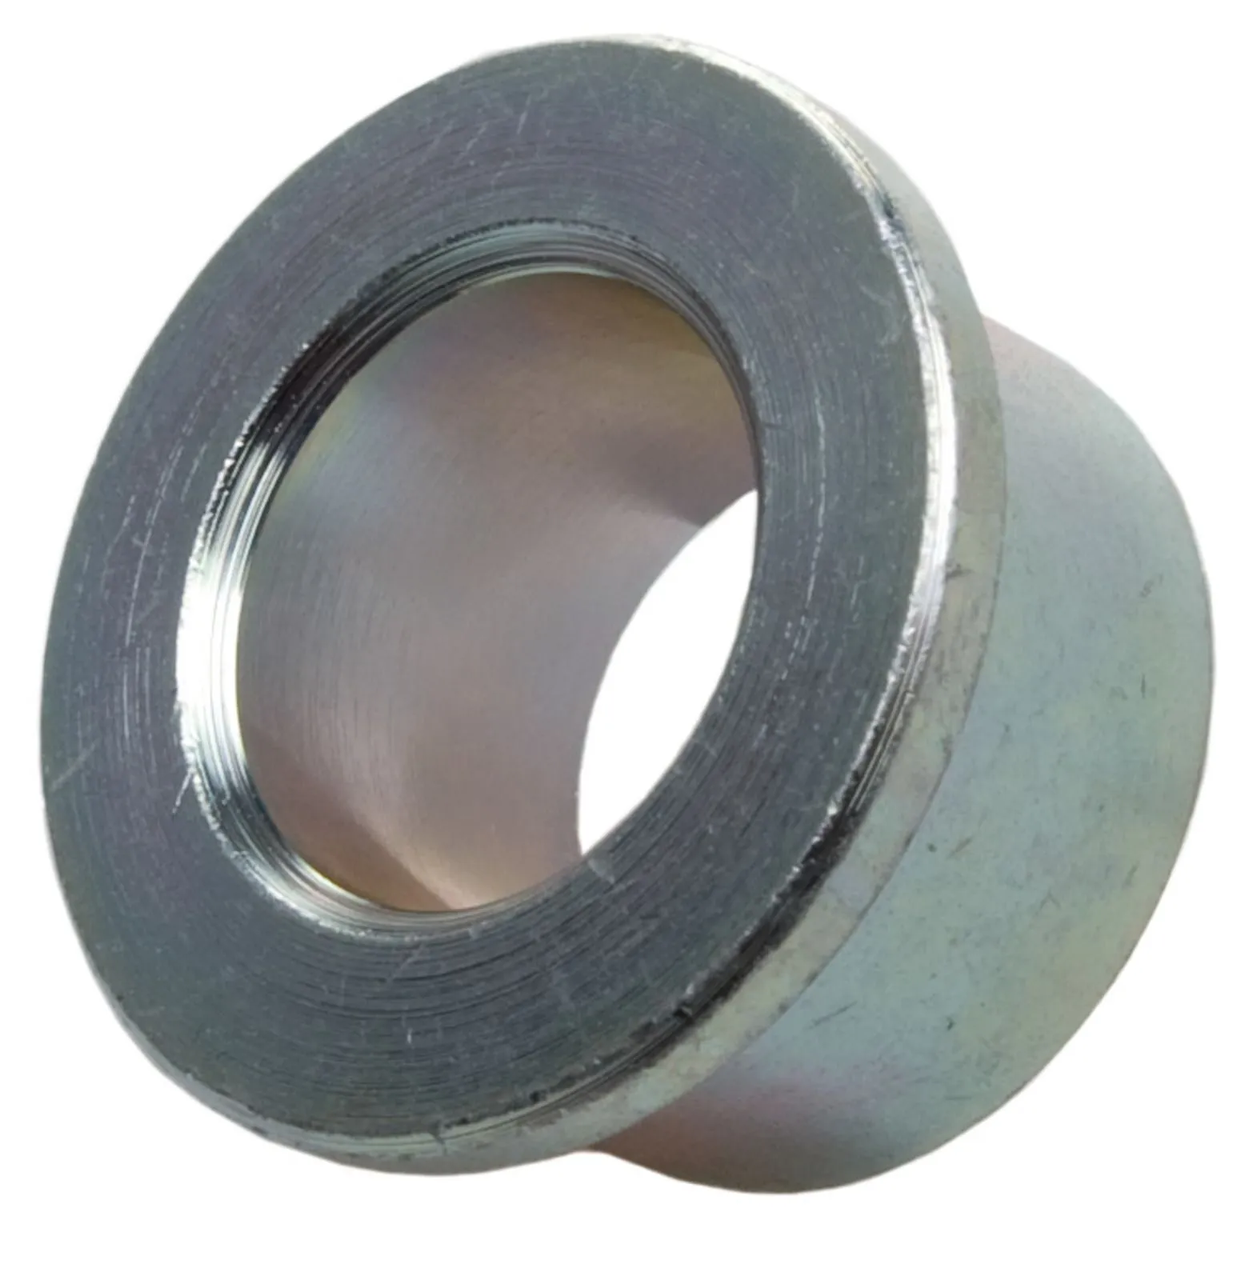 Bushing (Spacer), Rear Wheel Axle, right, SR250, XT250, XT350, SR500-'83 (if not bushing on chain tensioner), XT500, MT03, zinc plated, OEM reference # 90387-17141 (XT500 see also item 27610RP)